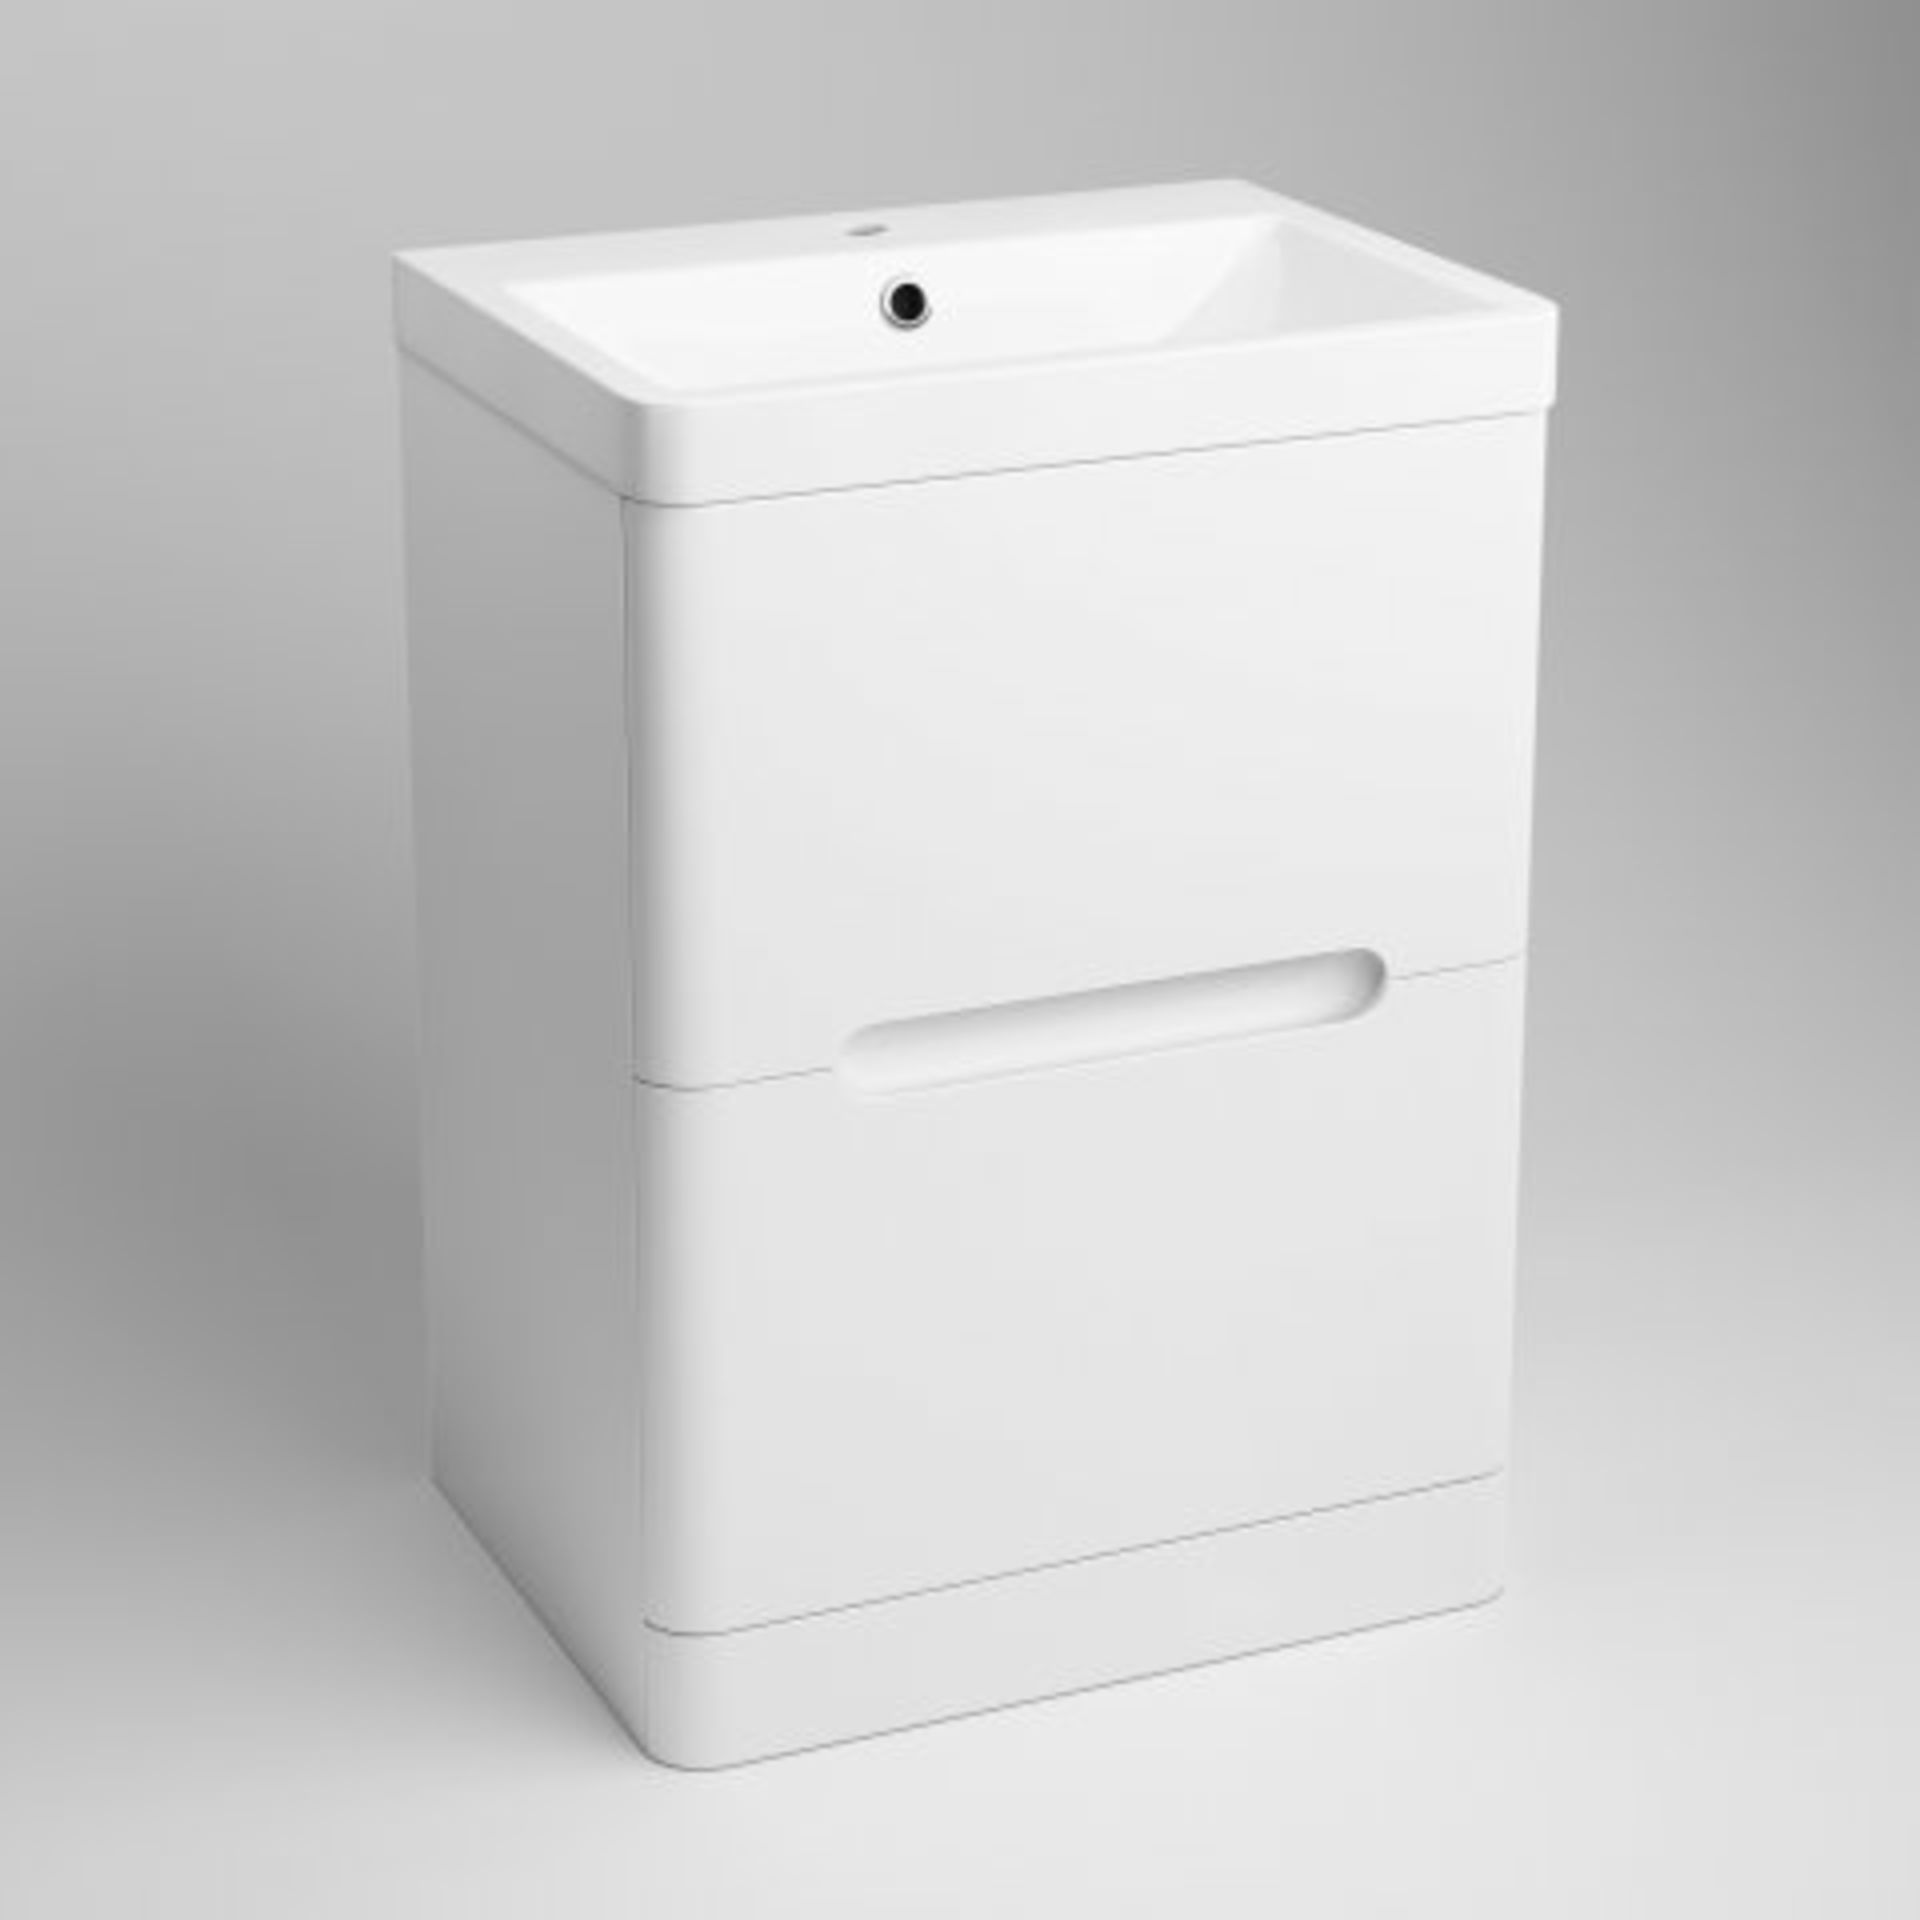 (O33) 600mm Tuscany Gloss White Built In Basin Double Drawer Unit - Floor Standing. RRP £499.99. - Image 4 of 5